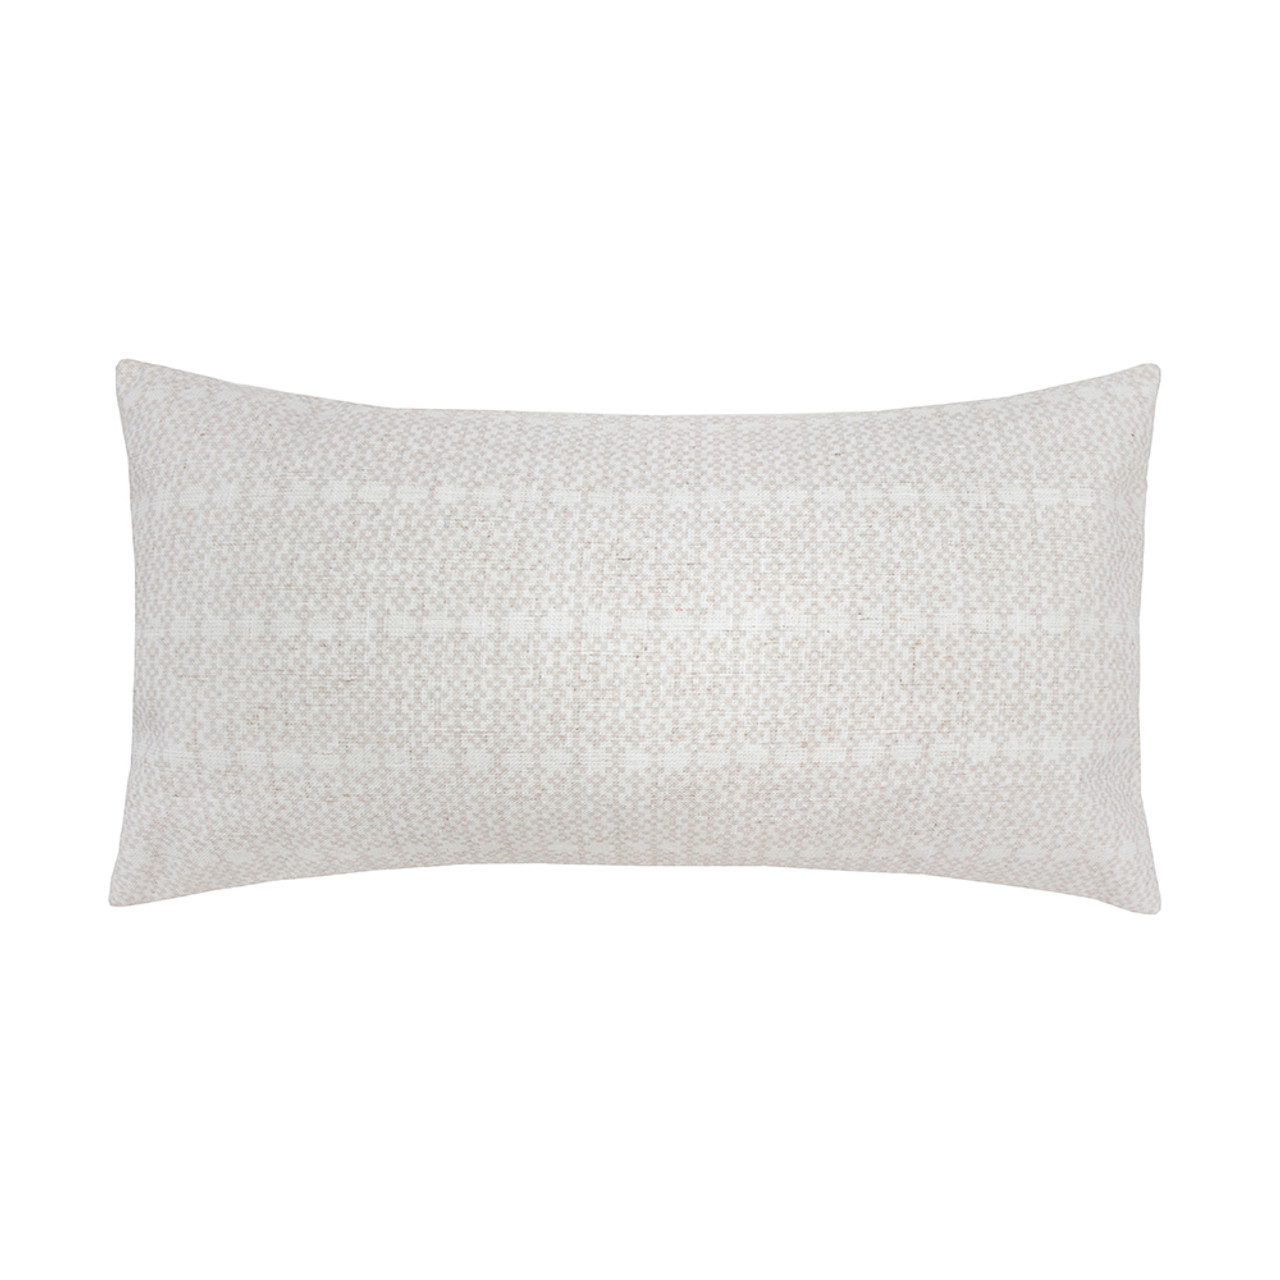 Bremer Ivory Long Filled Cushion by Bambury | My Linen